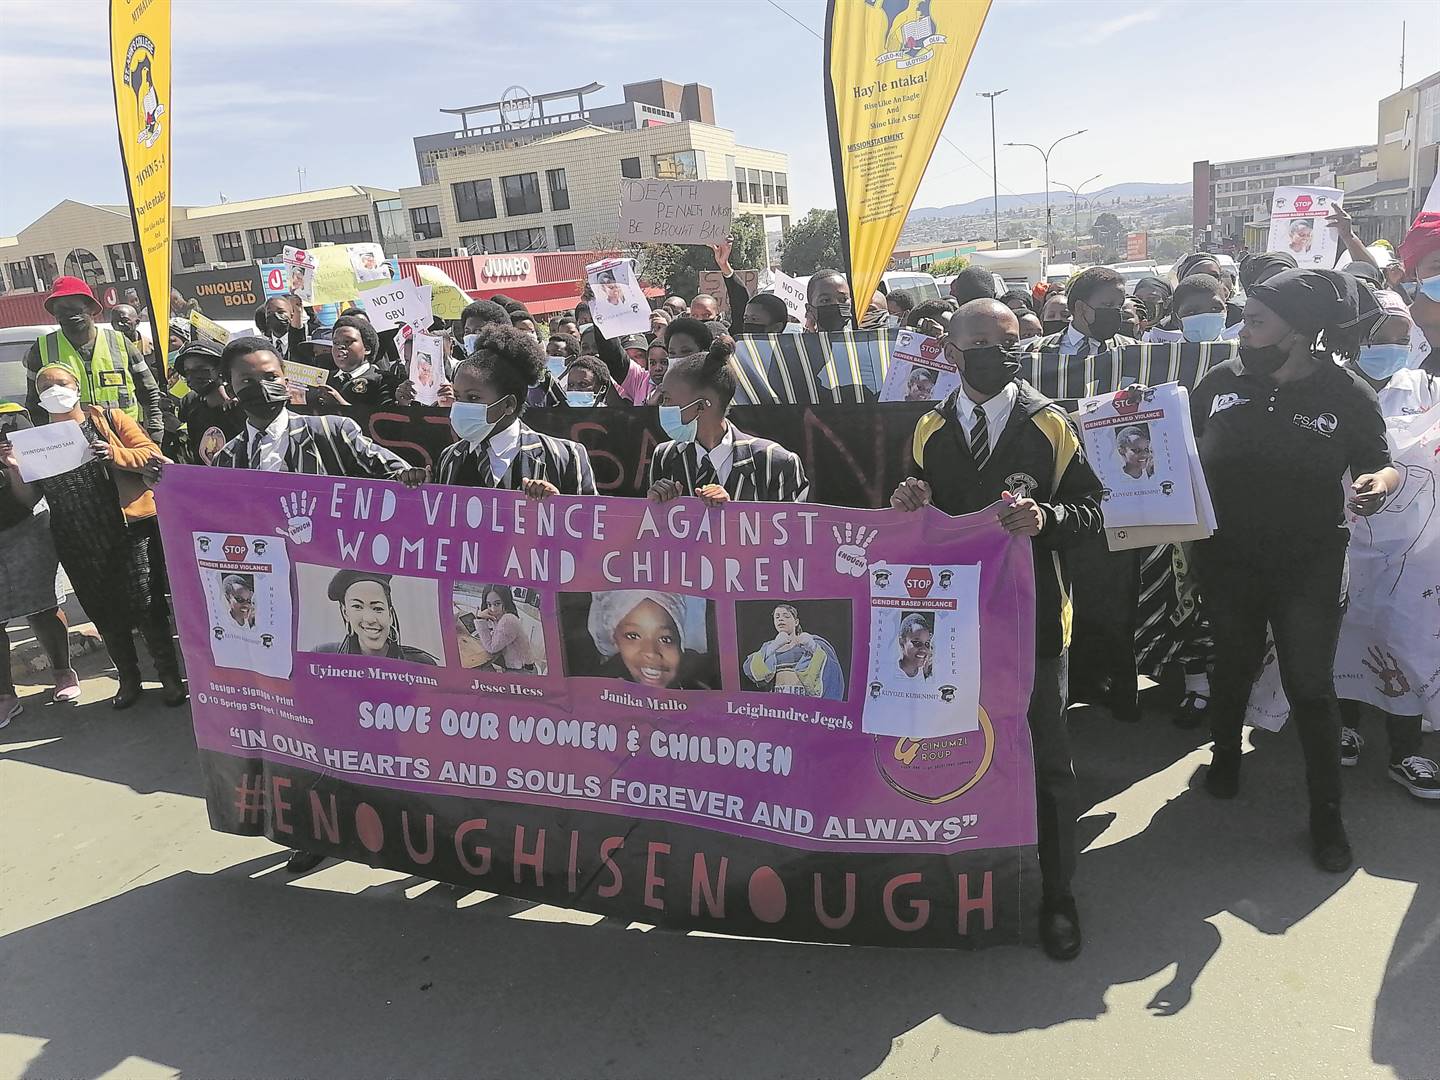 Women joined by female students from St John's College marched to the Mthatha Magistrate's Court calling for harsh sentences for perpetrators of GBV and femicide. (Photo: Luvo Cakata)